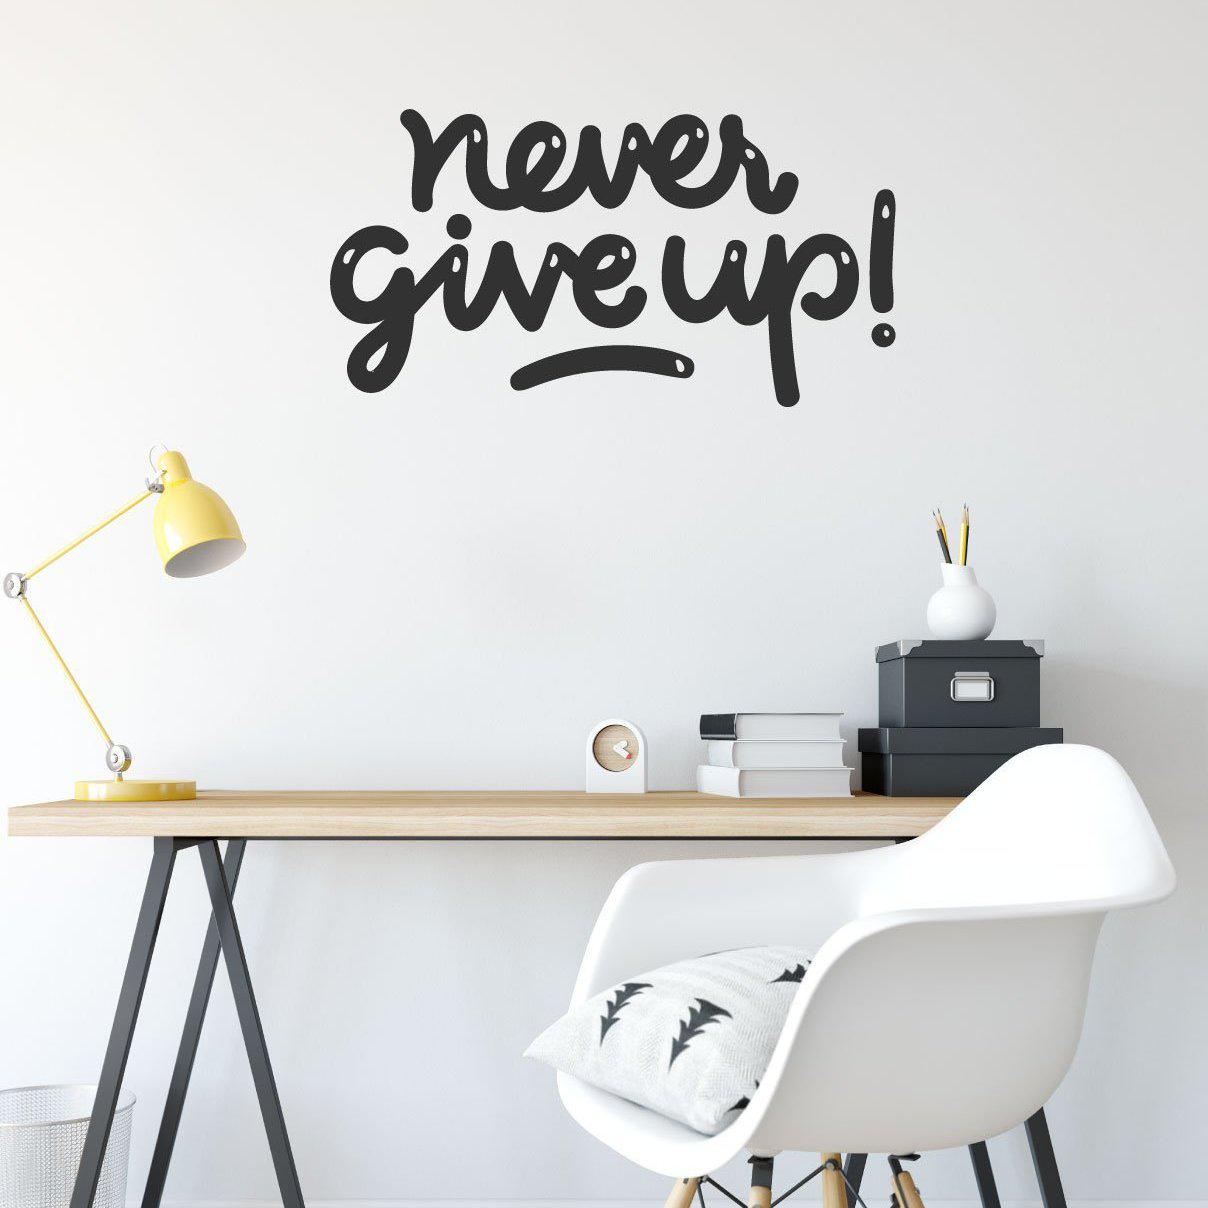 Never Give Up Motivational Wall Sticker Quote